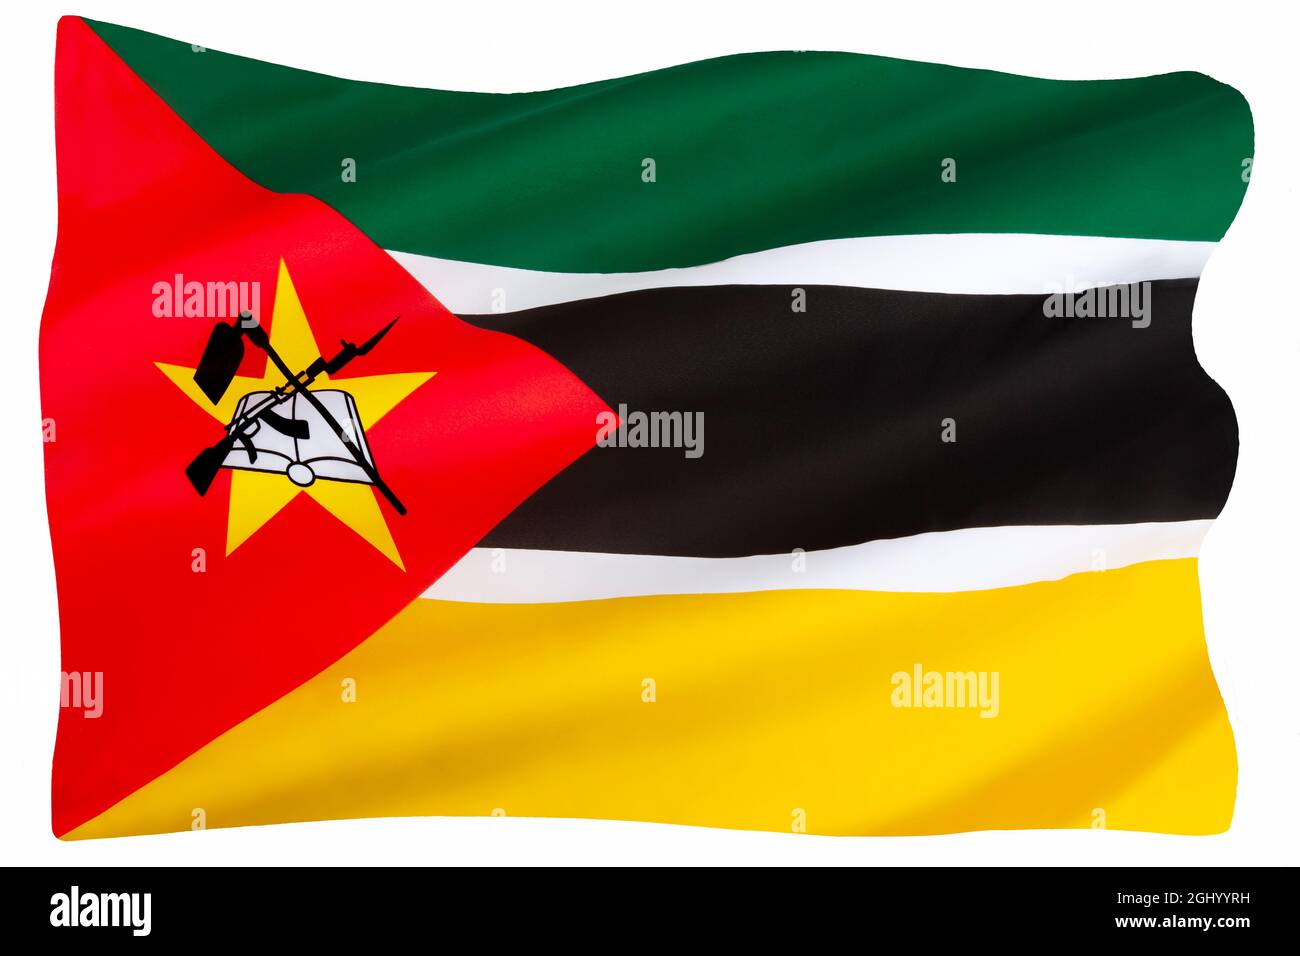 The flag of Mozambique was adopted on 1 May 1983. It includes the image of a Kalashnikov rifle with a bayonet attached to the barrel crossed by a hoe, Stock Photo